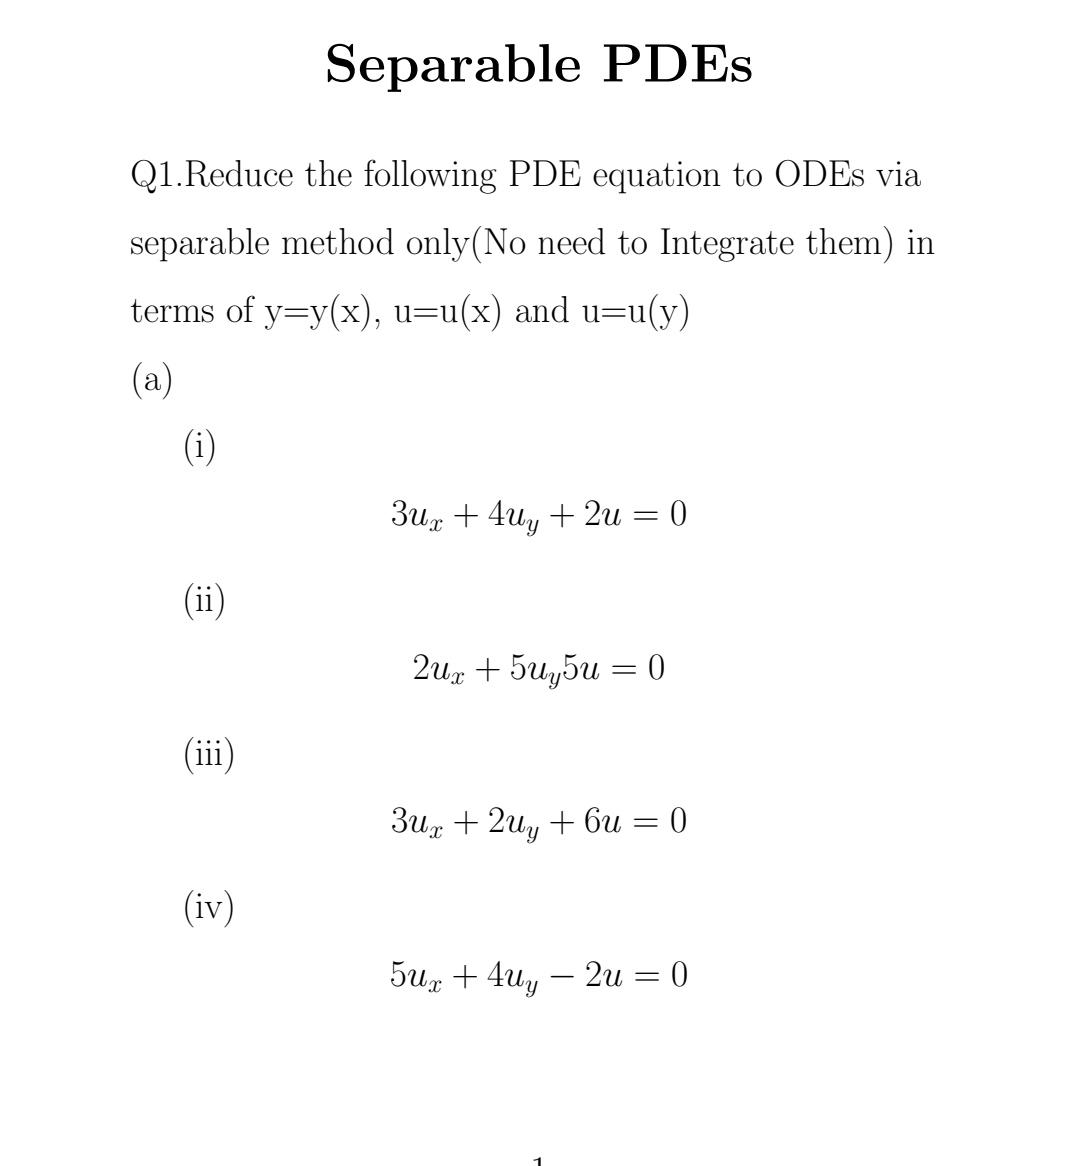 Separable PDES Q1.Reduce the following PDE equation to ODEs via separable method only (No need to Integrate